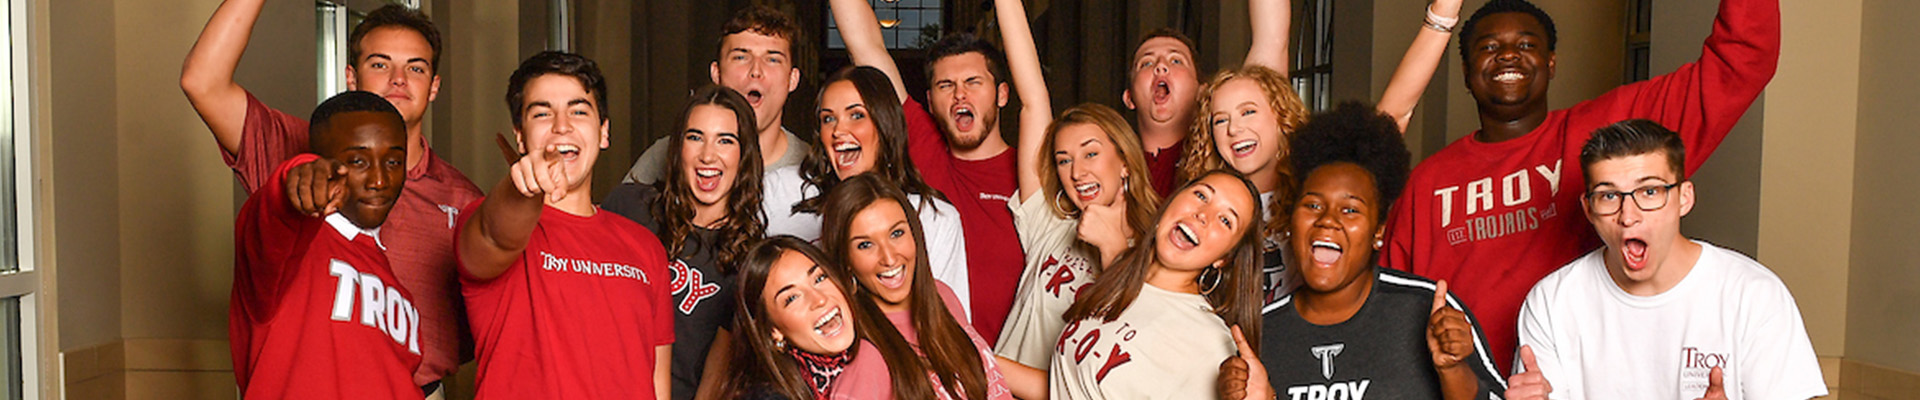 Students cheering at a TROY football game.